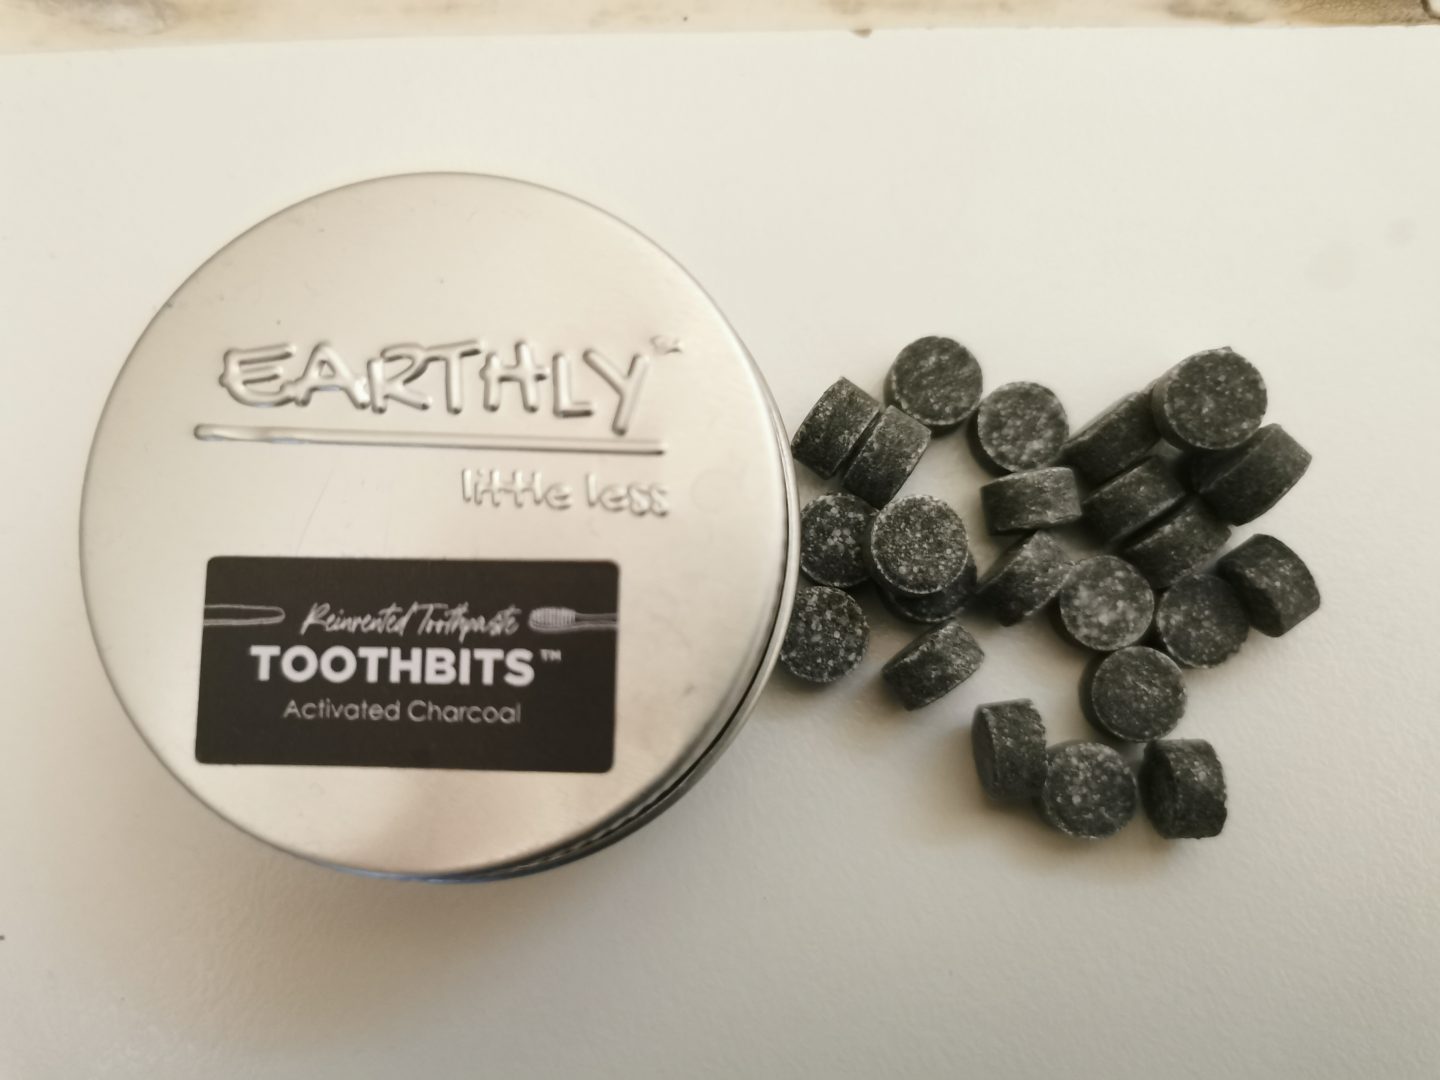 Earthly Toothbits Product Review | Waste-free Living with HarassedMom